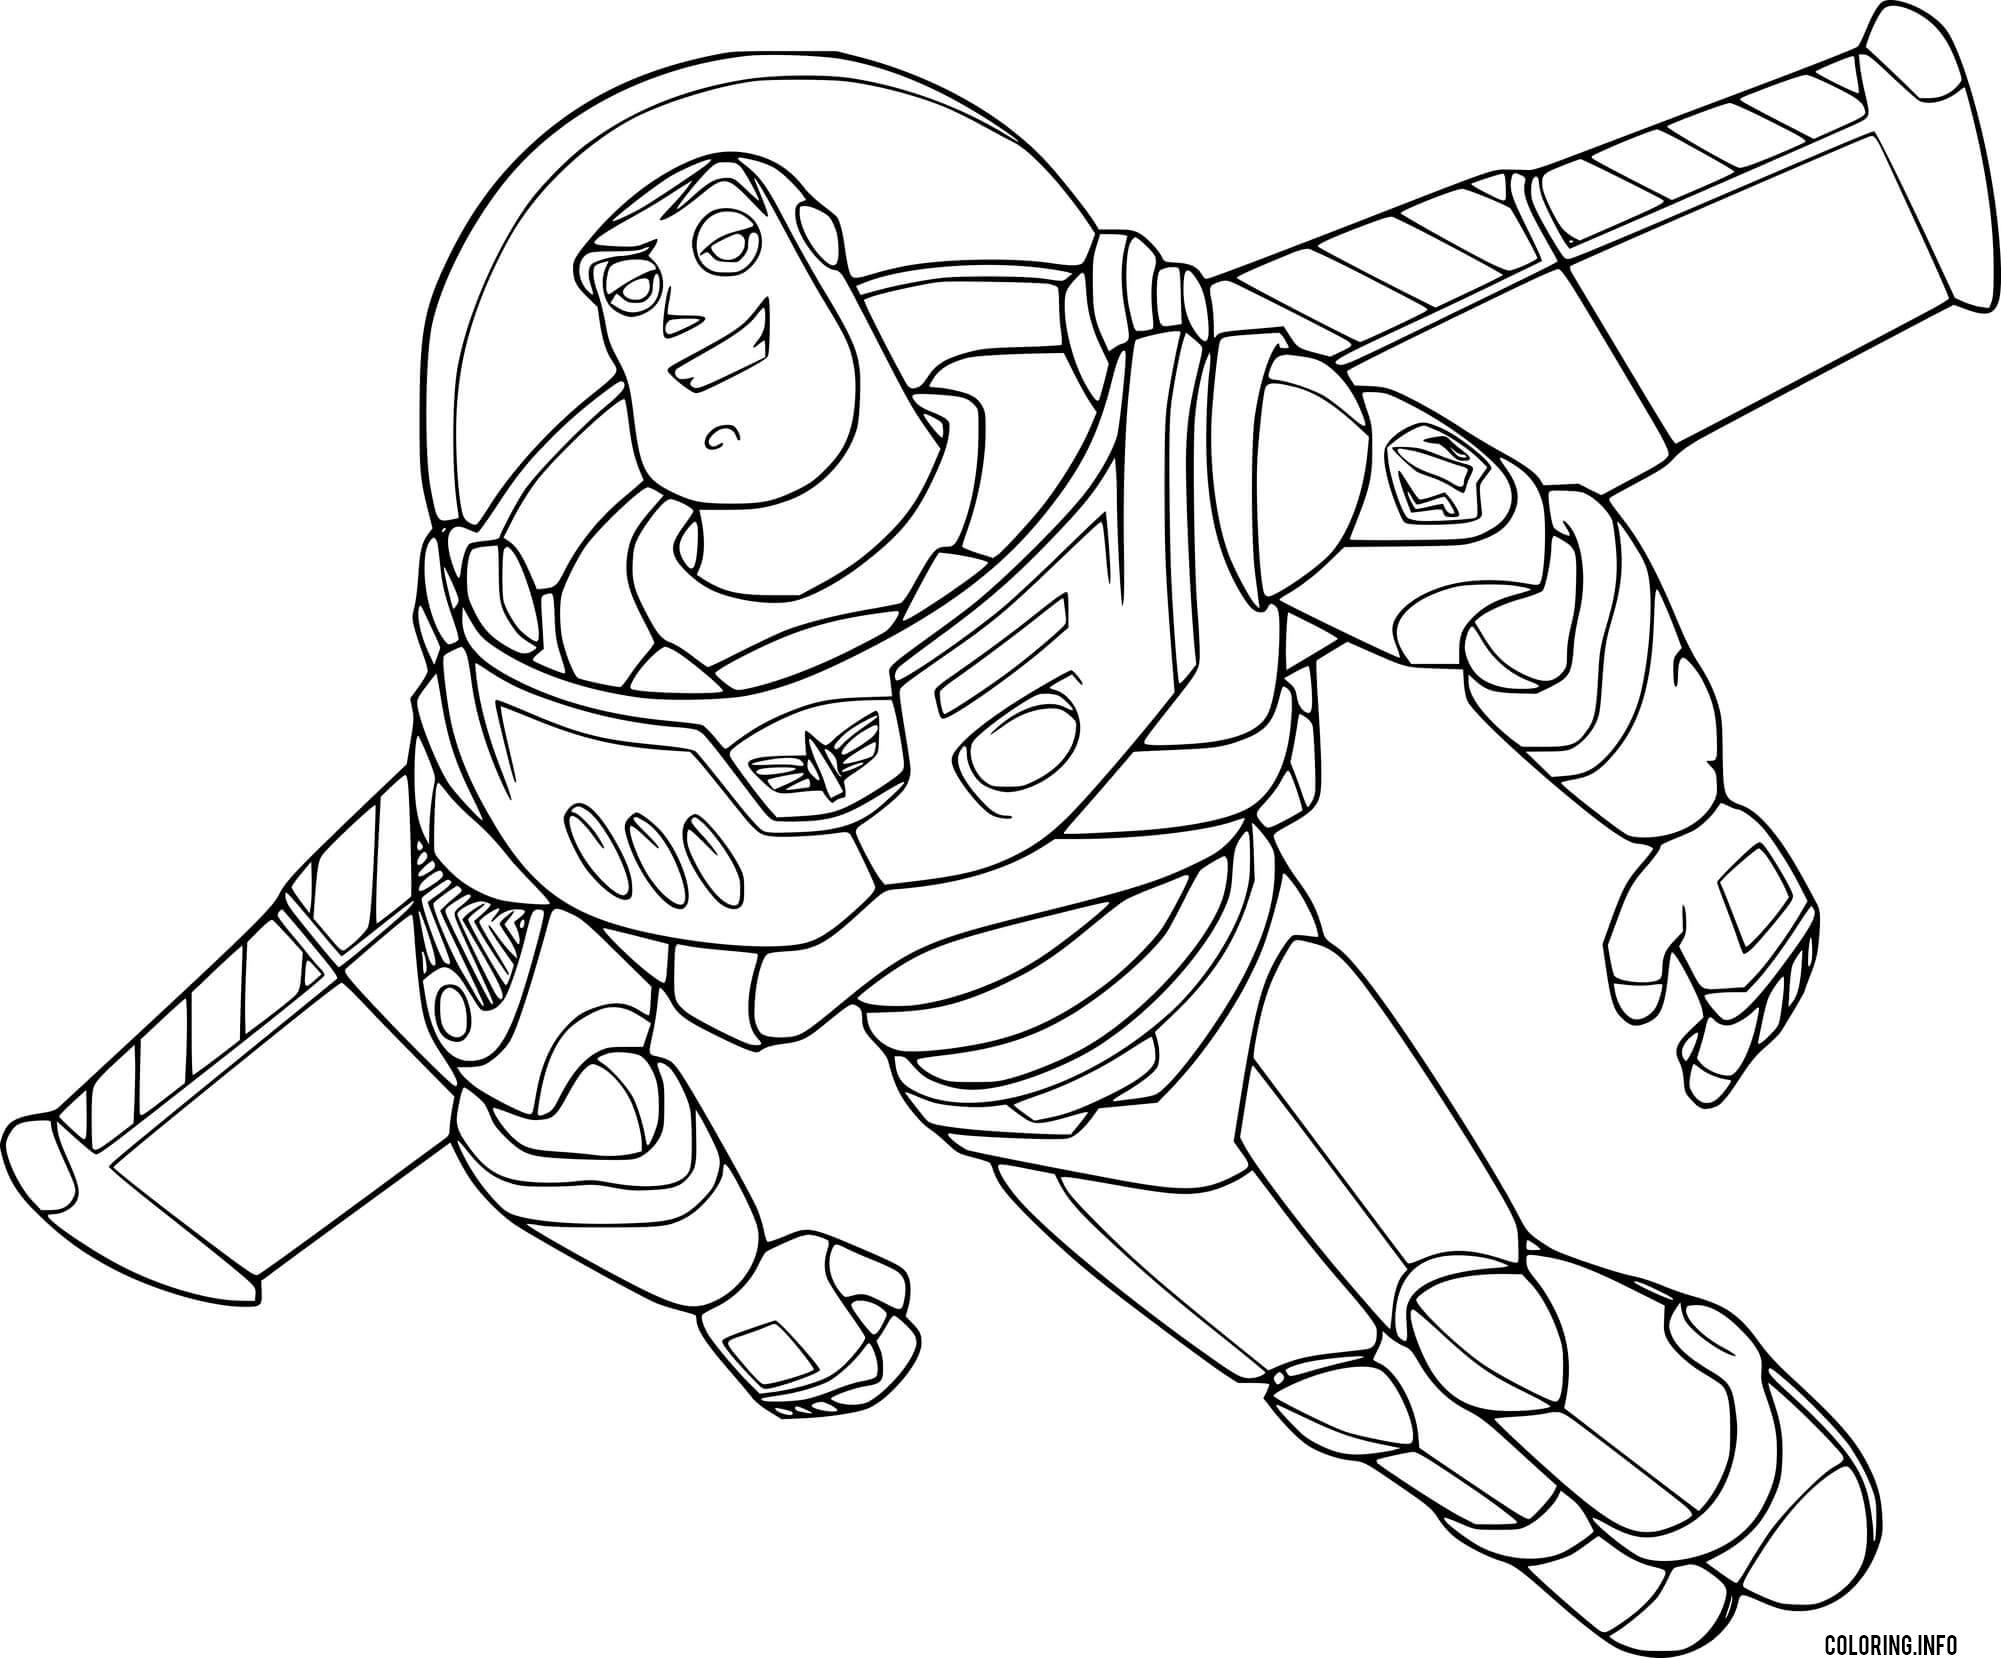 Smiling Buzz Lightyear coloring